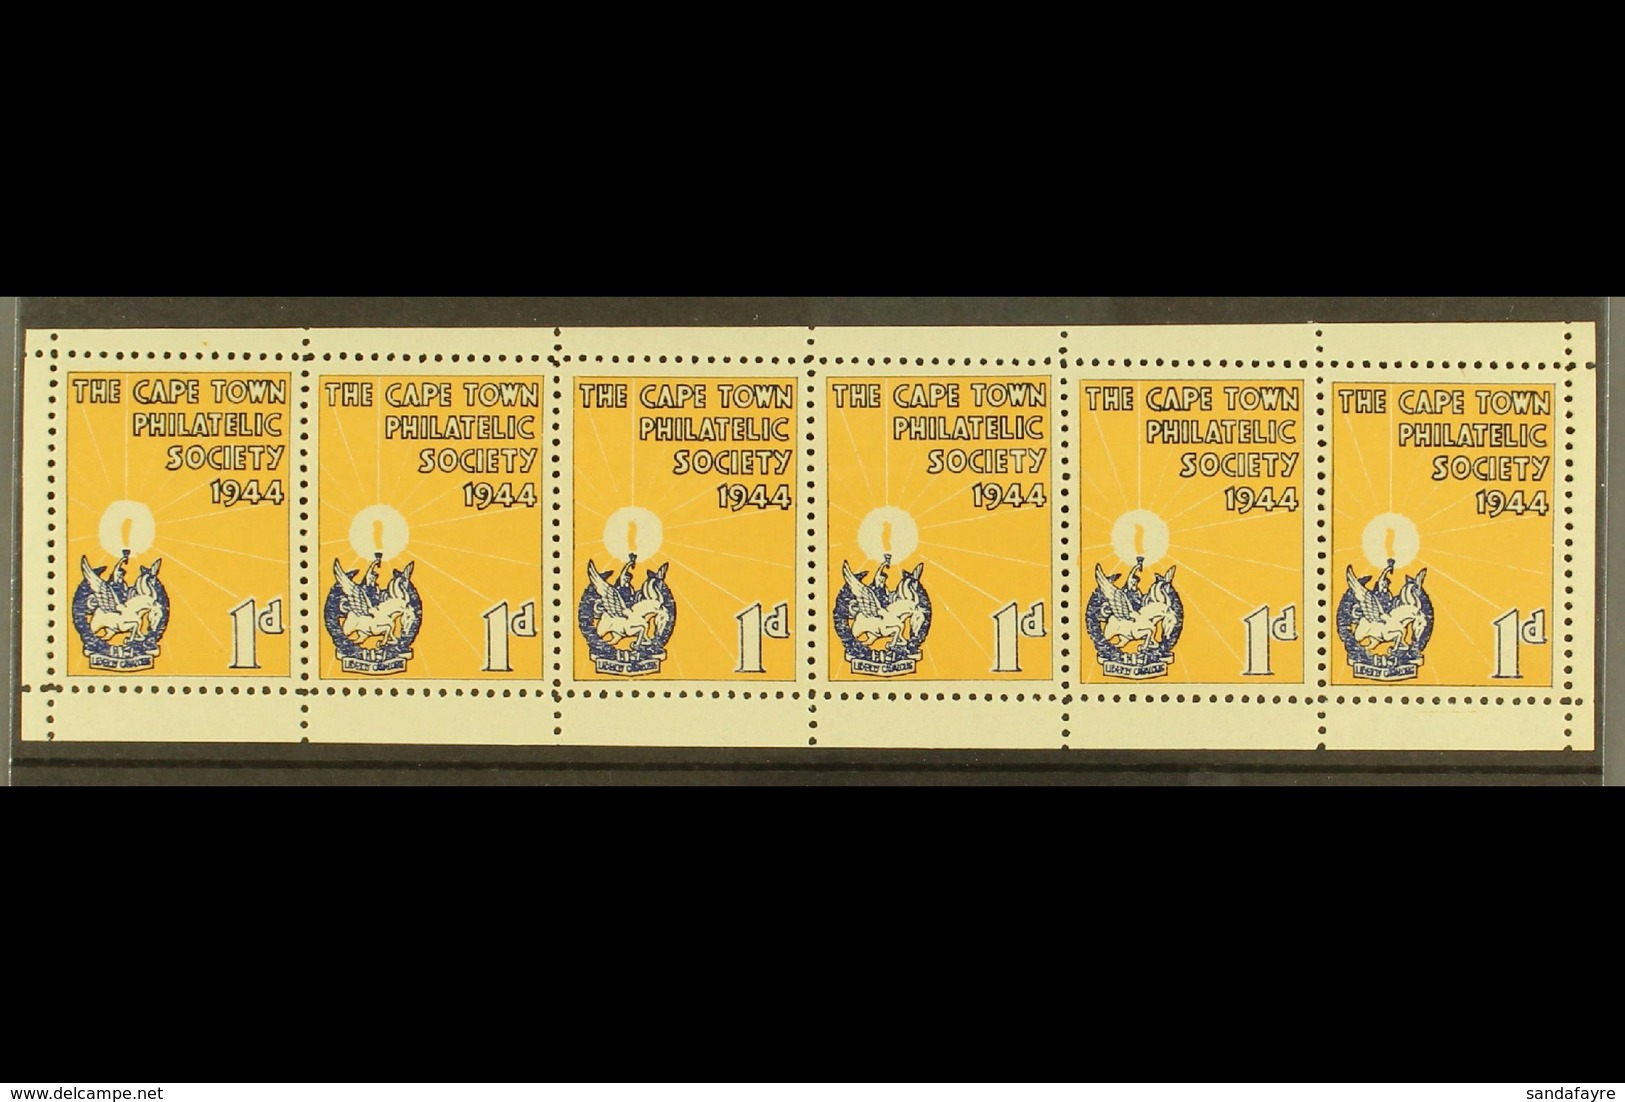 CINDERELLA LABEL 1944 "The Cape Town Philatelic Society" 1d Blue & Buff, Strip Of 6 Labels With Margins All Around, Gumm - Unclassified